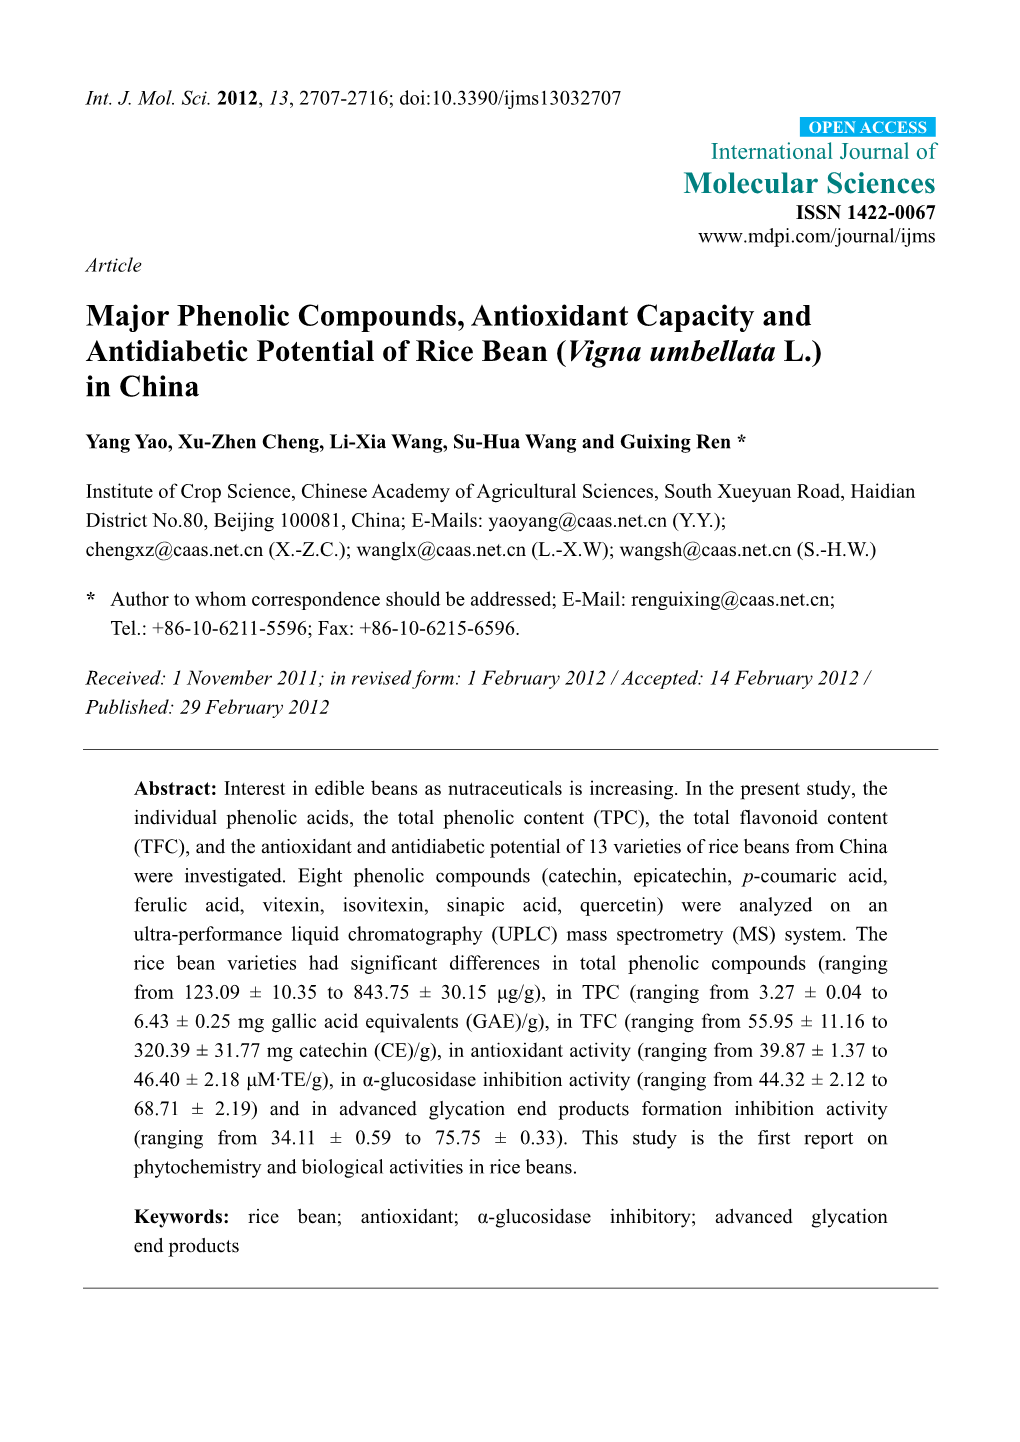 Major Phenolic Compounds, Antioxidant Capacity and Antidiabetic Potential of Rice Bean (Vigna Umbellata L.) in China